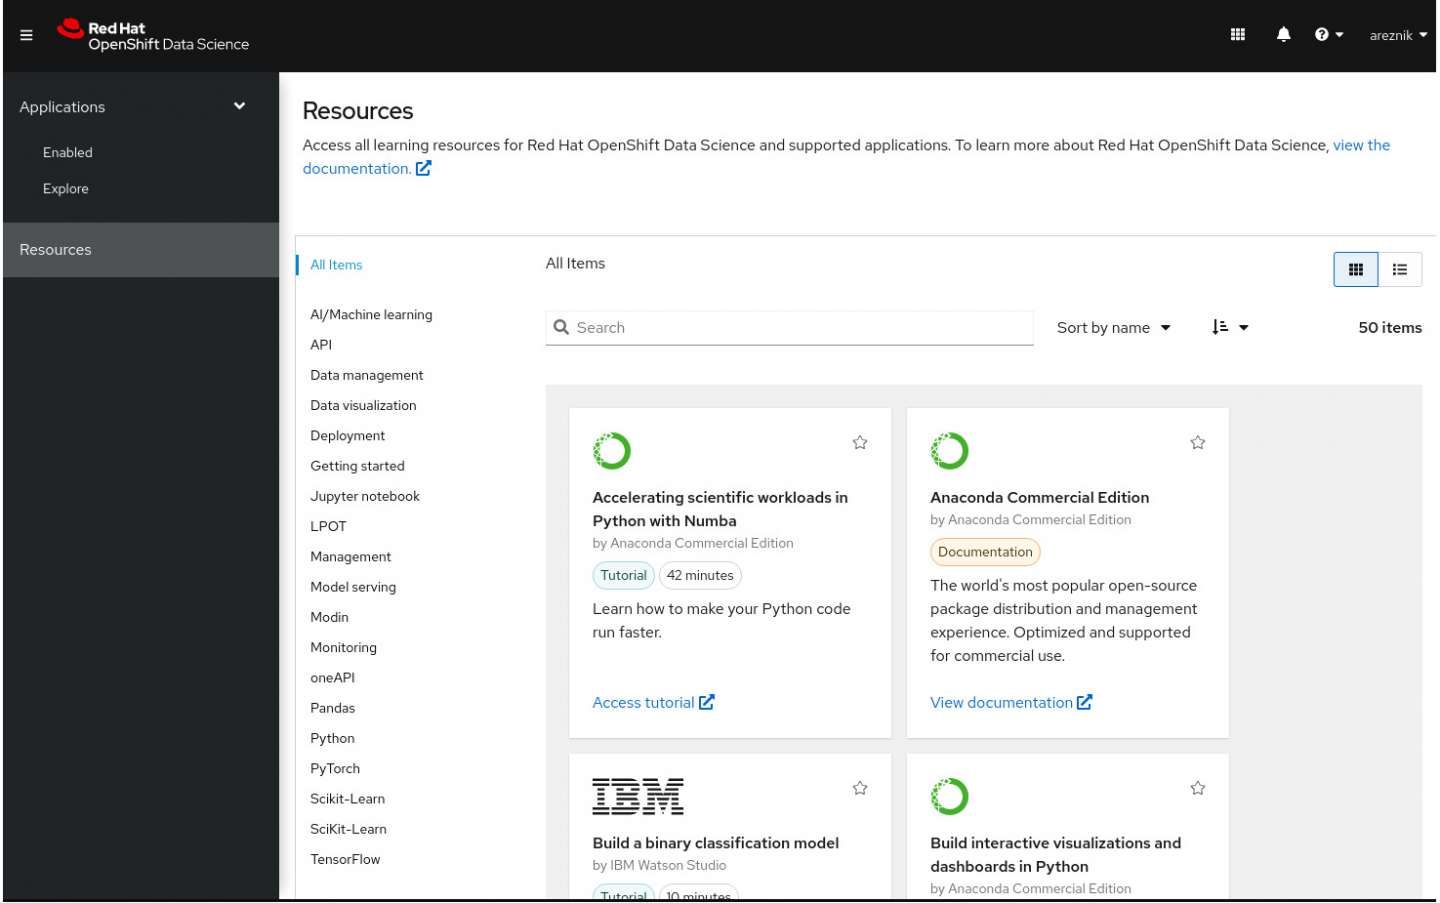 The Resources tab in OpenShift Dedicated gives you access to documentation and learning materials.